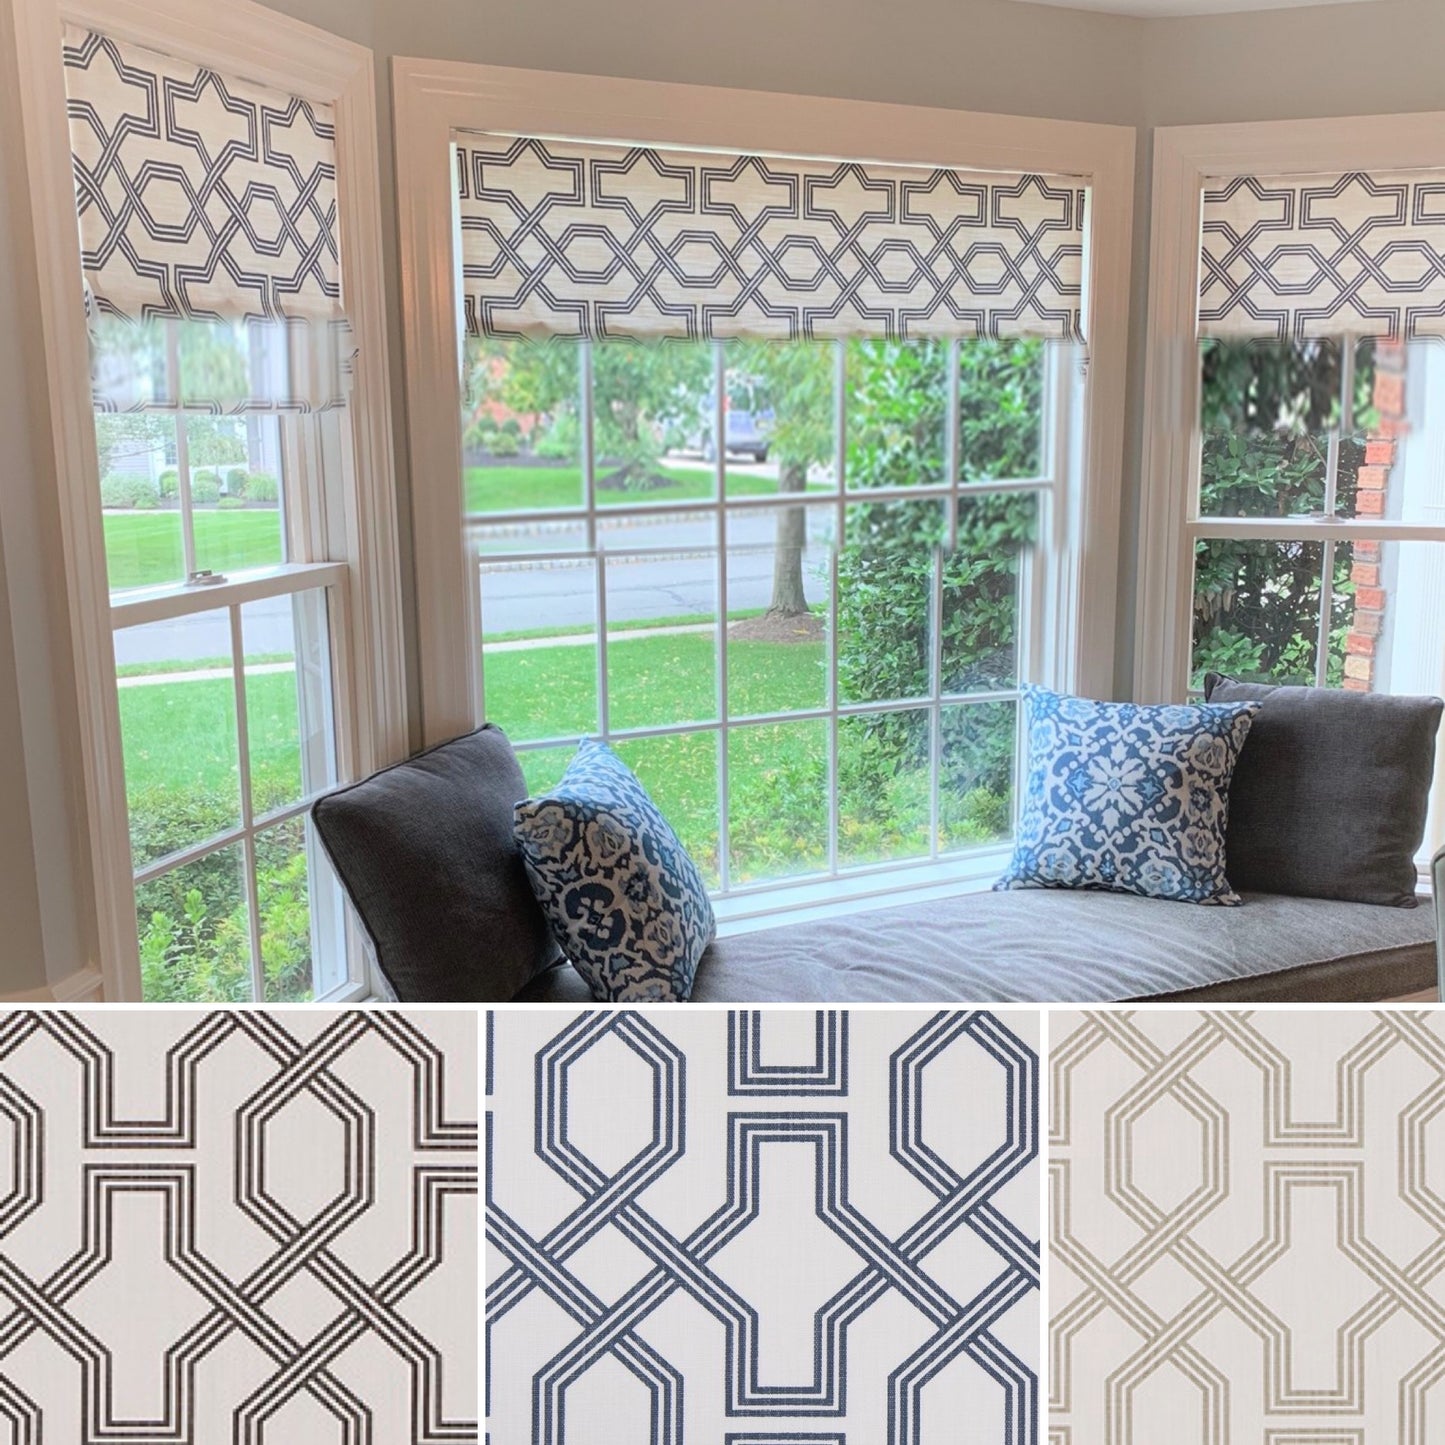 Straight Modern Valance Custom Made in Ander Blue or Graphite Grey and White Geometric Print on Premium Cotton Linen, Fully Lined